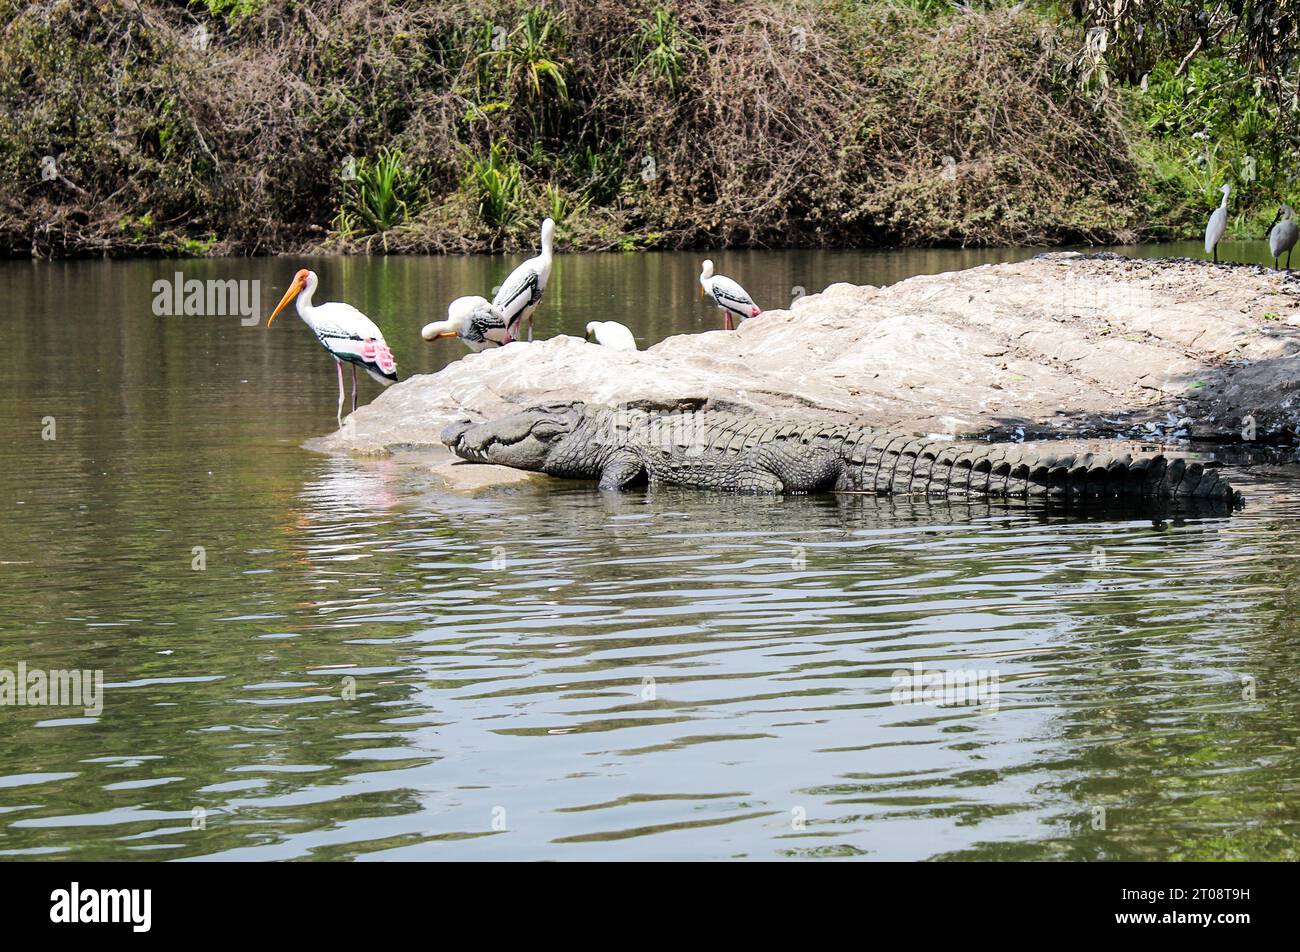 Mugger crocodile resting when painted storks sip on the water in a sunny day. Stock Photo